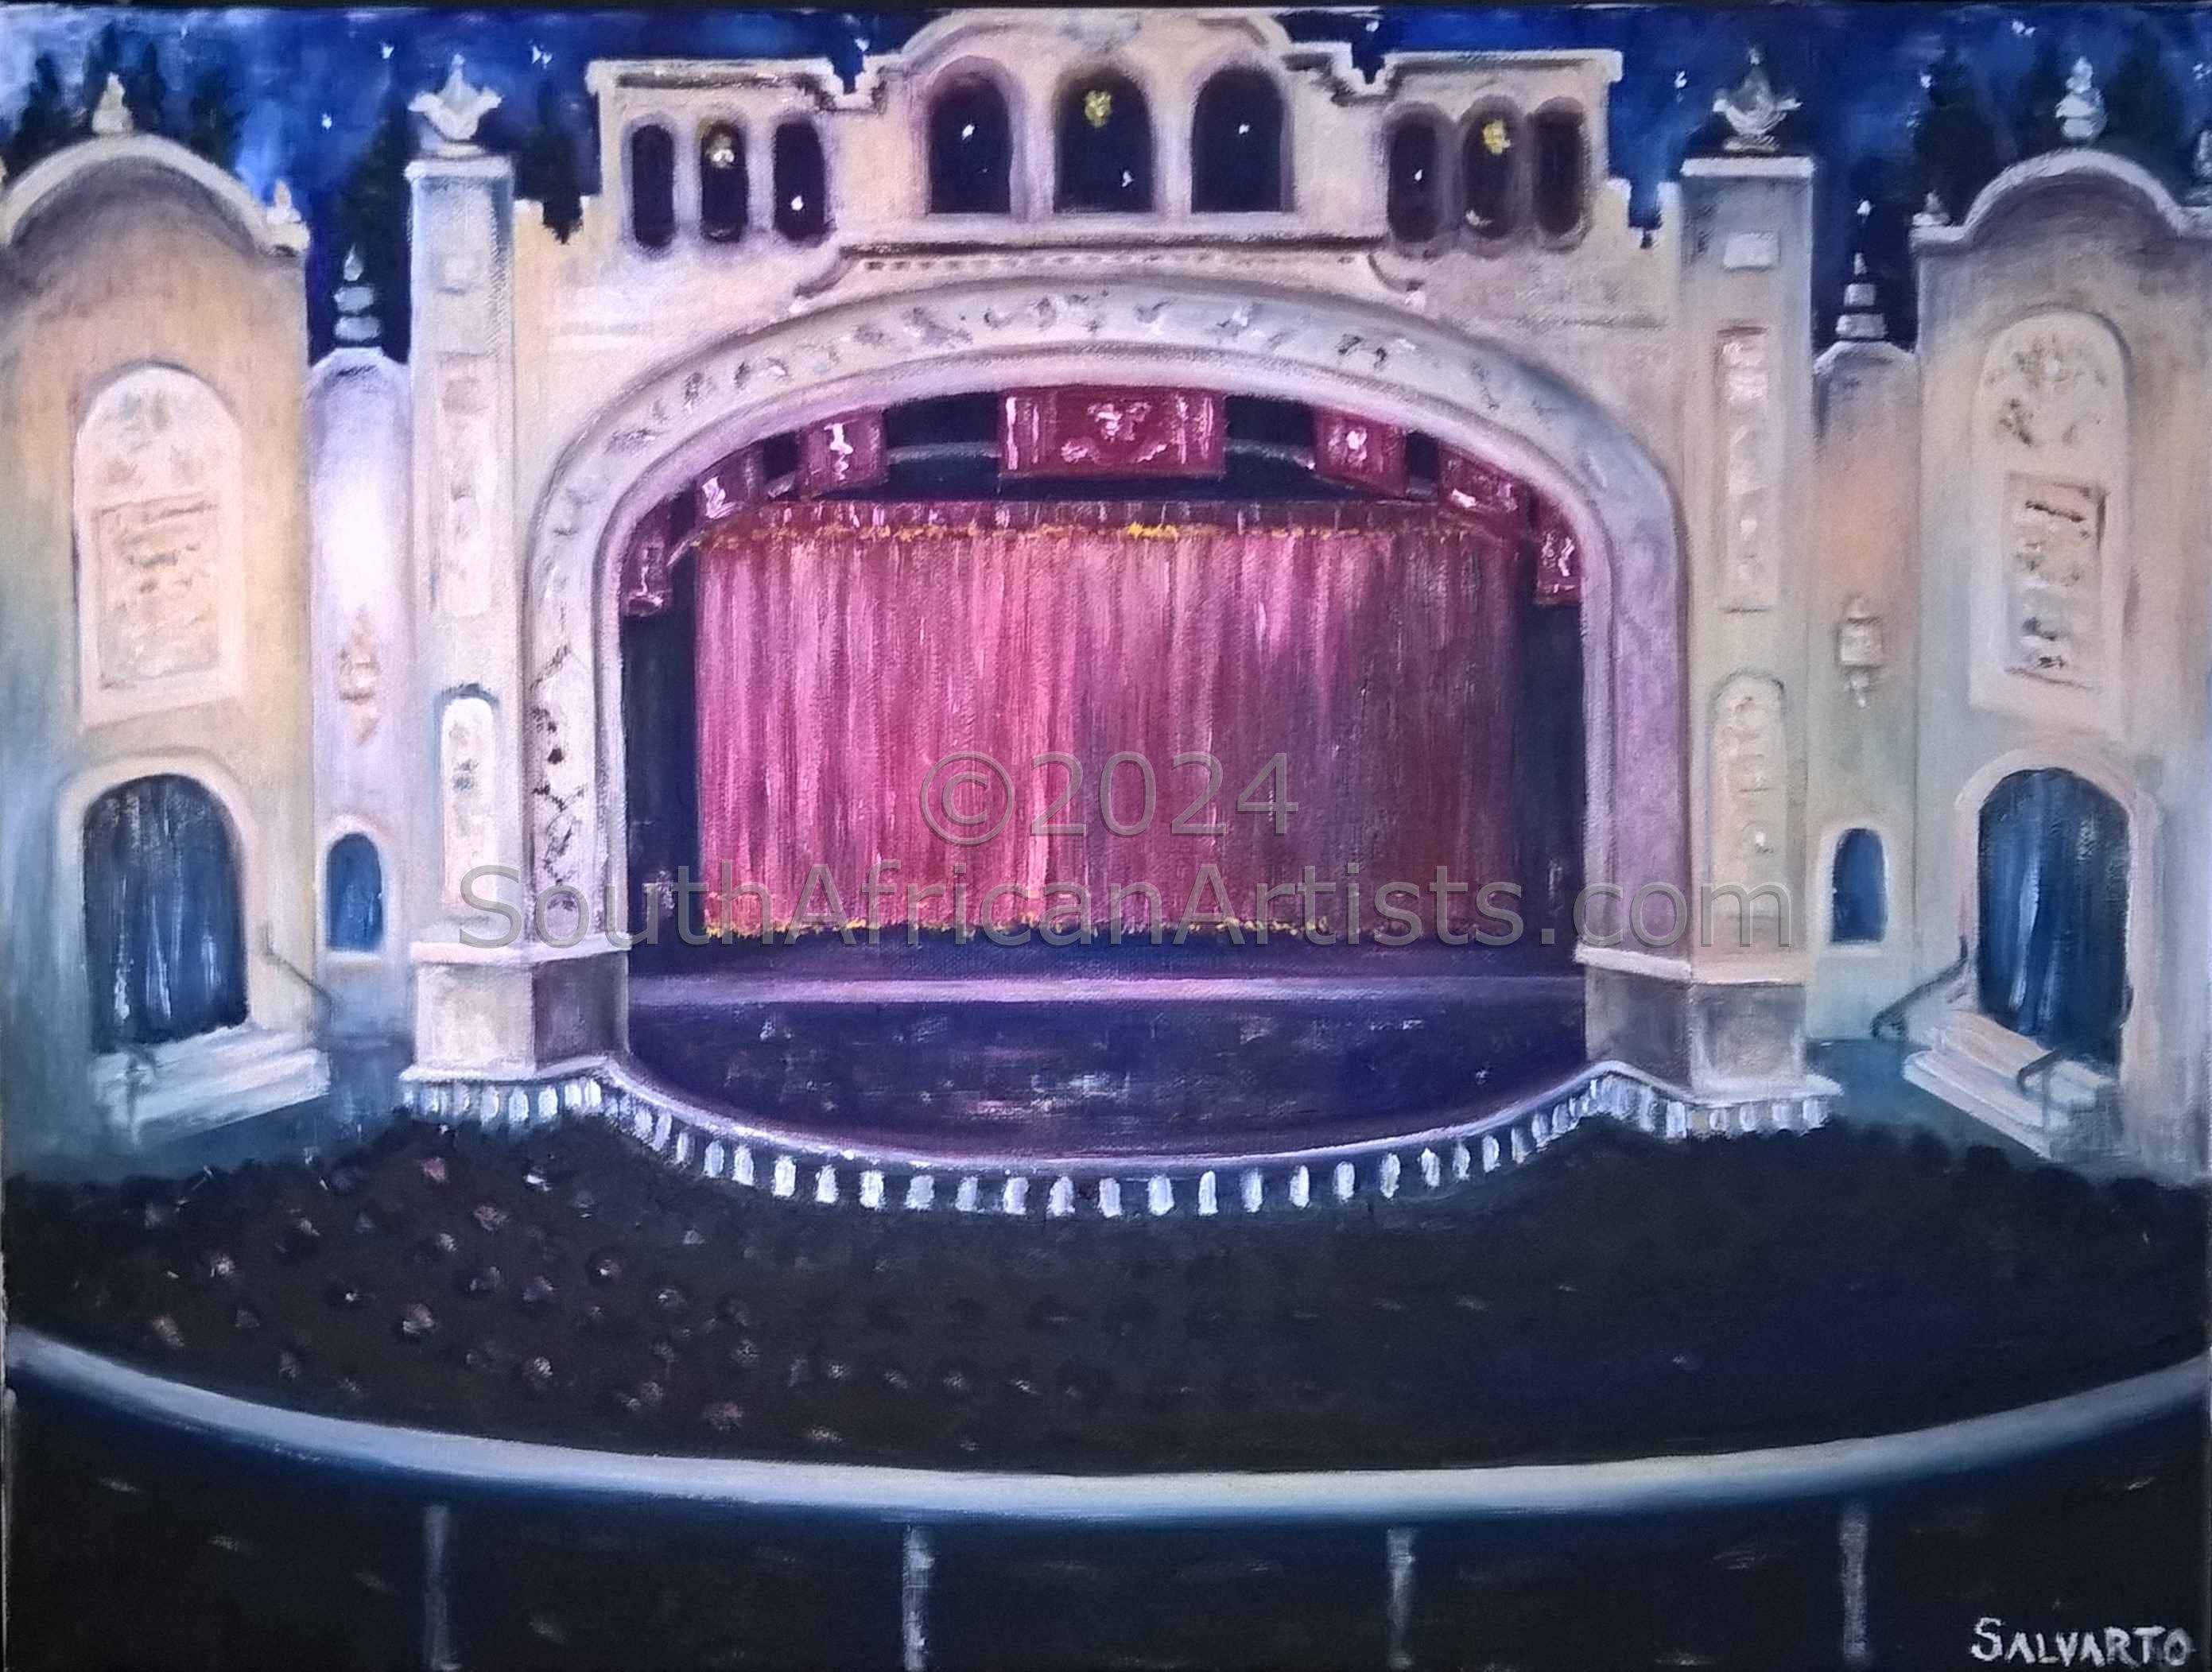 The Alhambra Theatre Inside